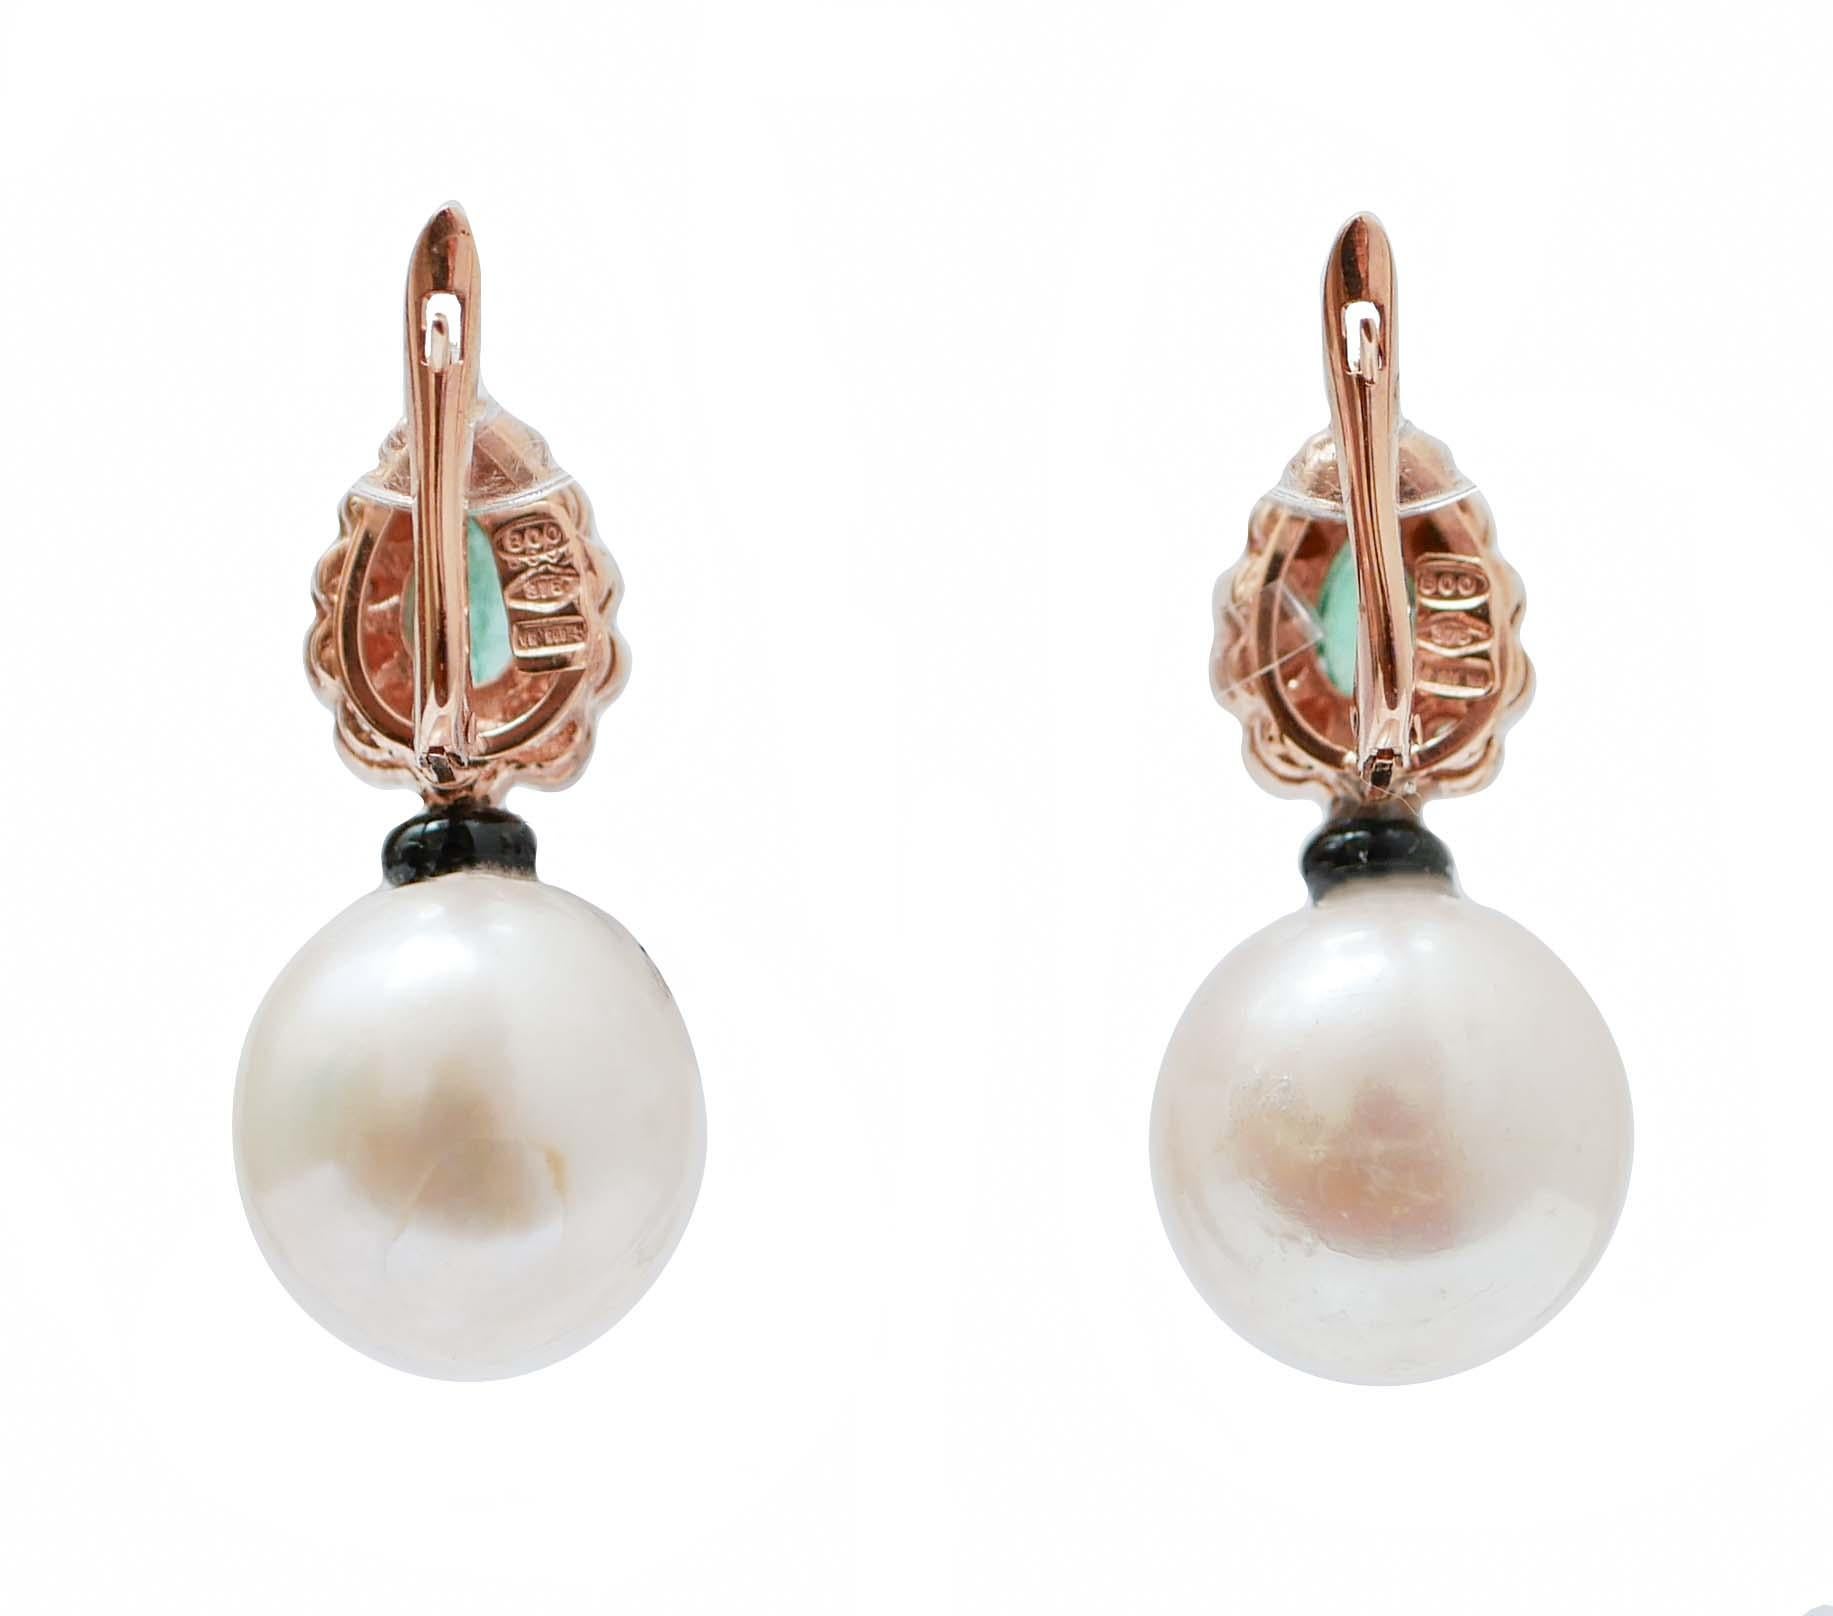 Retro White Pearls, Emeralds, Diamonds, Onyx, Rose Gold and Silver Earrings. For Sale